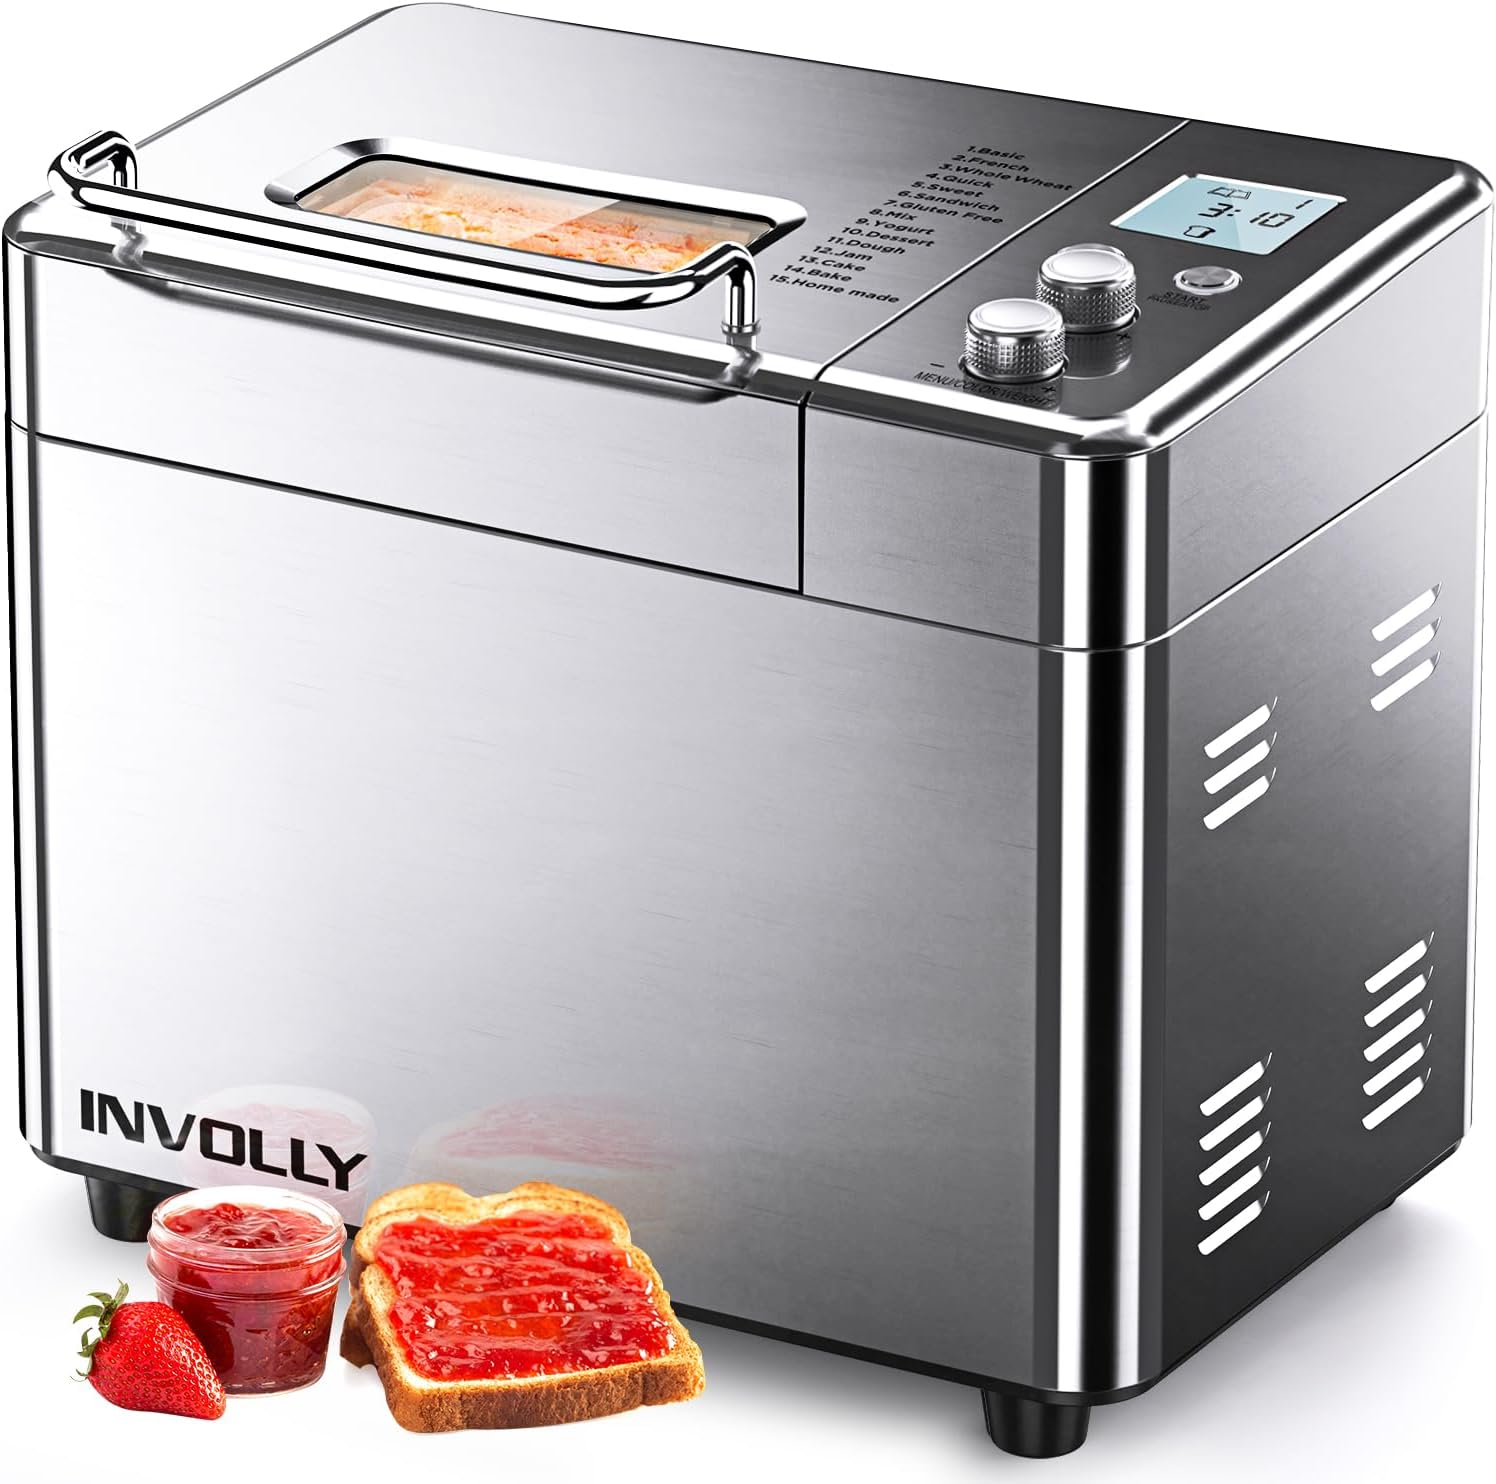 Involly 15 in 1 Bread Maker Review